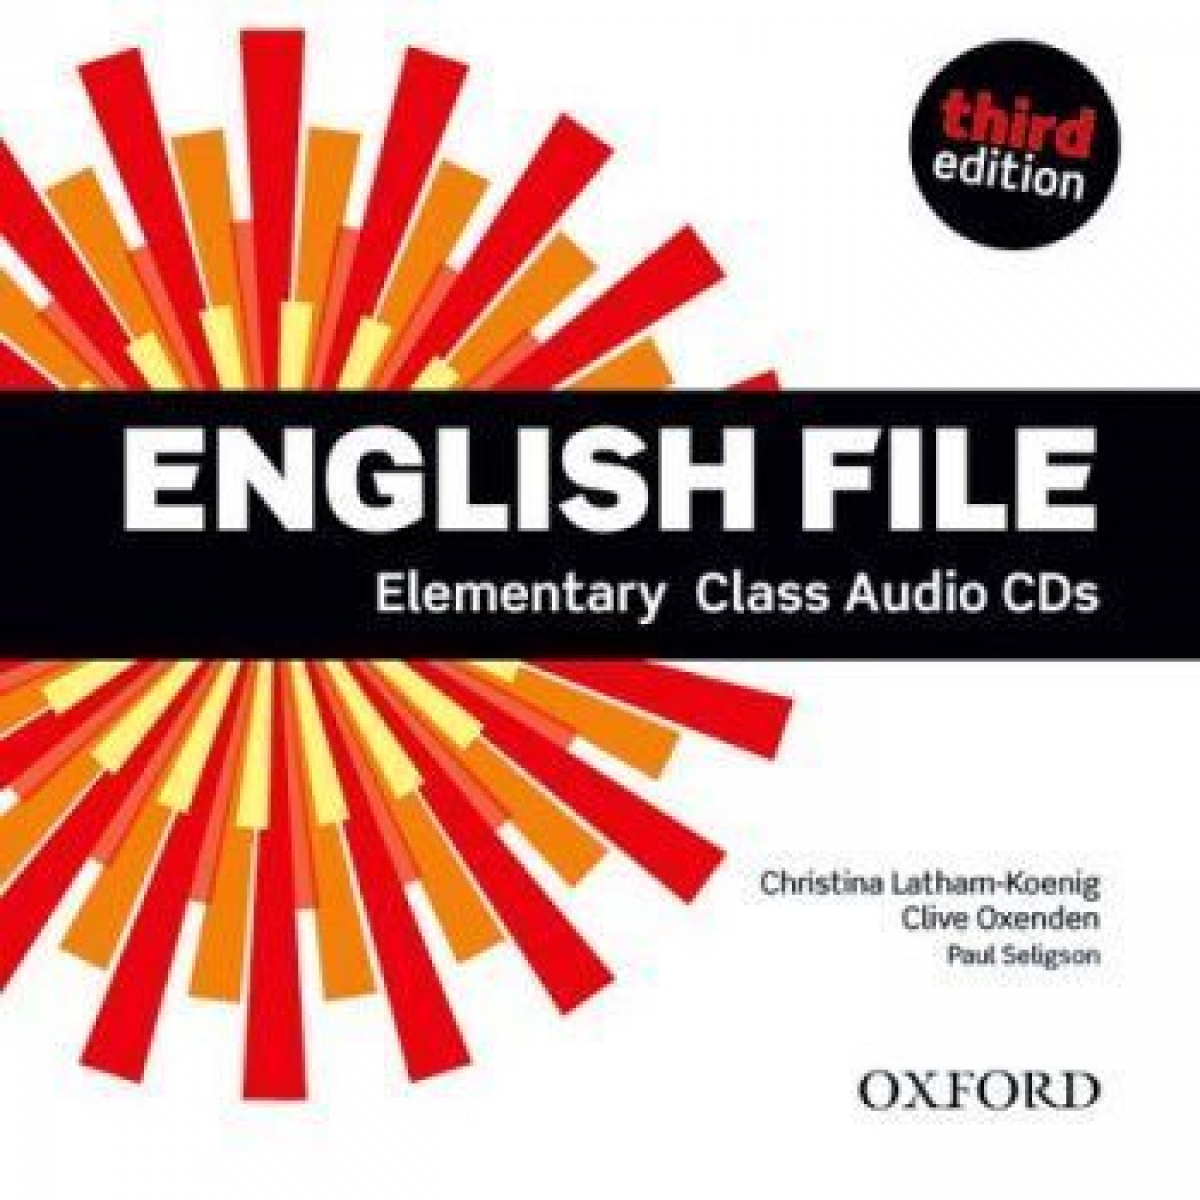 Clive Oxenden, Christina Latham-Koenig, and Paul Seligson English File Third Edition Elementary Class Audio CDs 